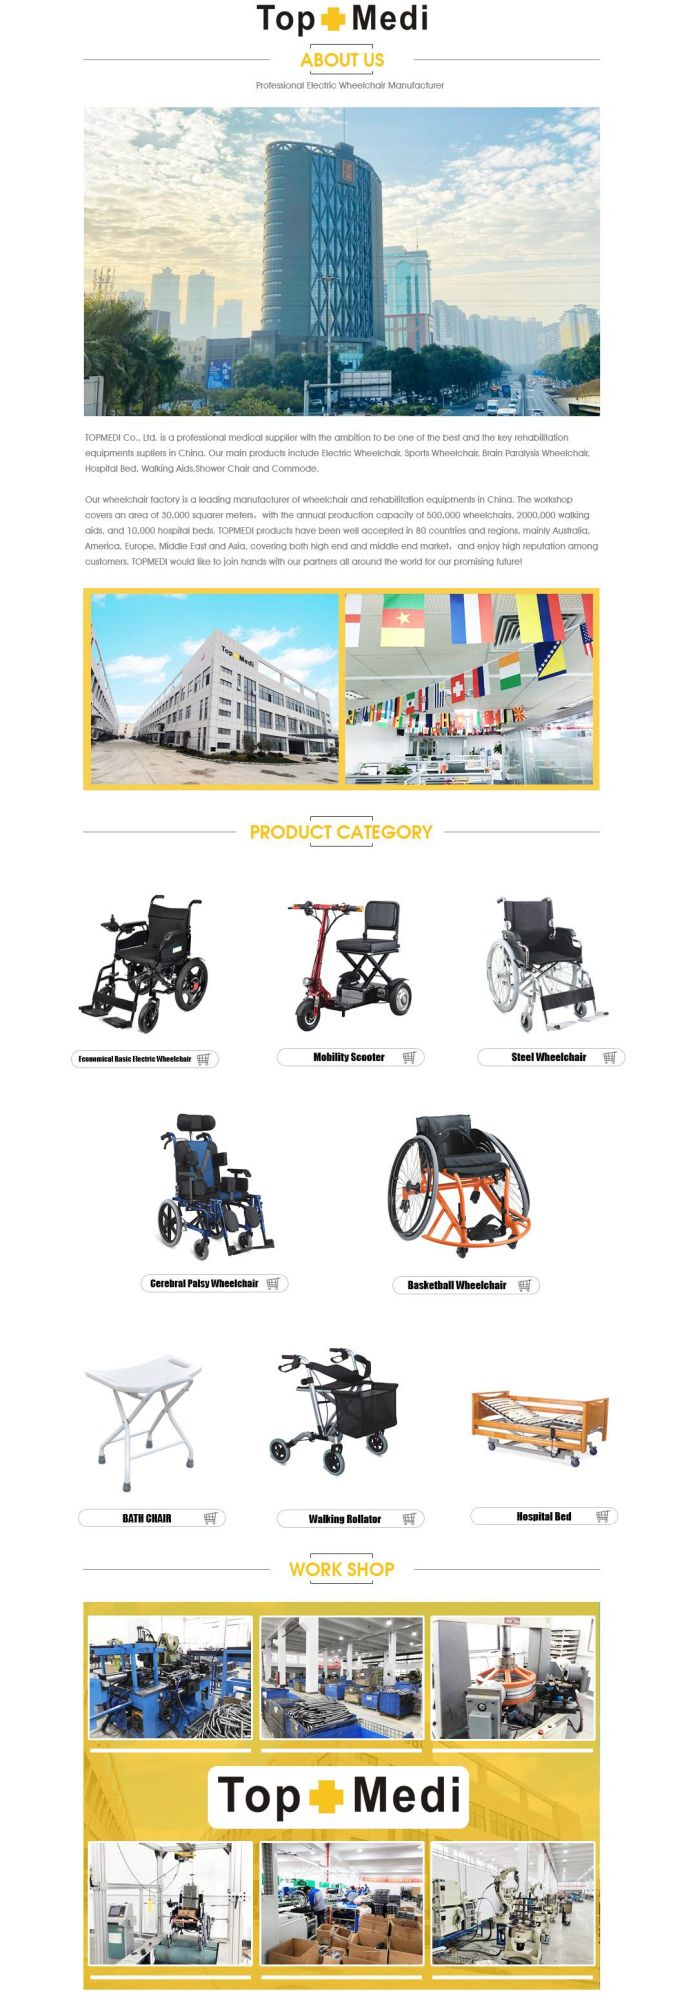 Medical Device Aluminum Folding Power Wheelchair with Optional Battery